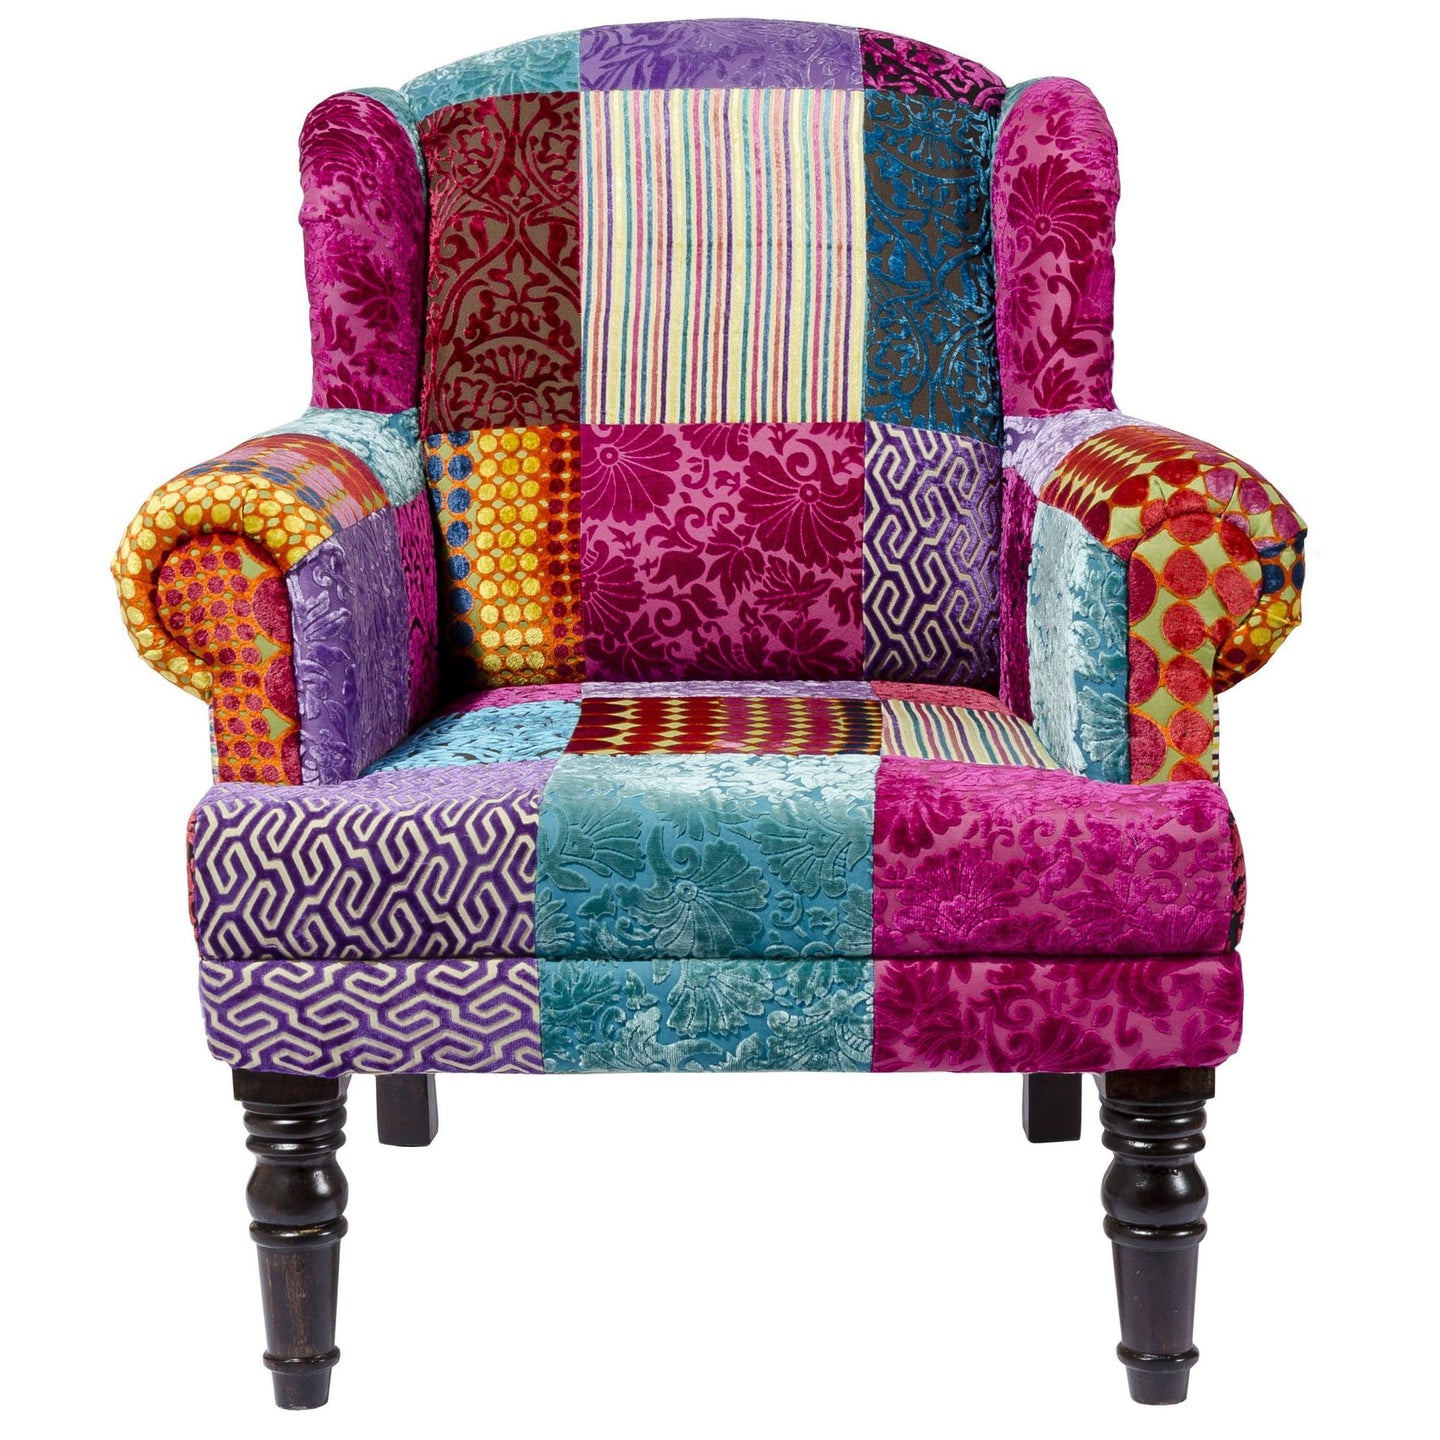 Maria arm chair in brasso fabric